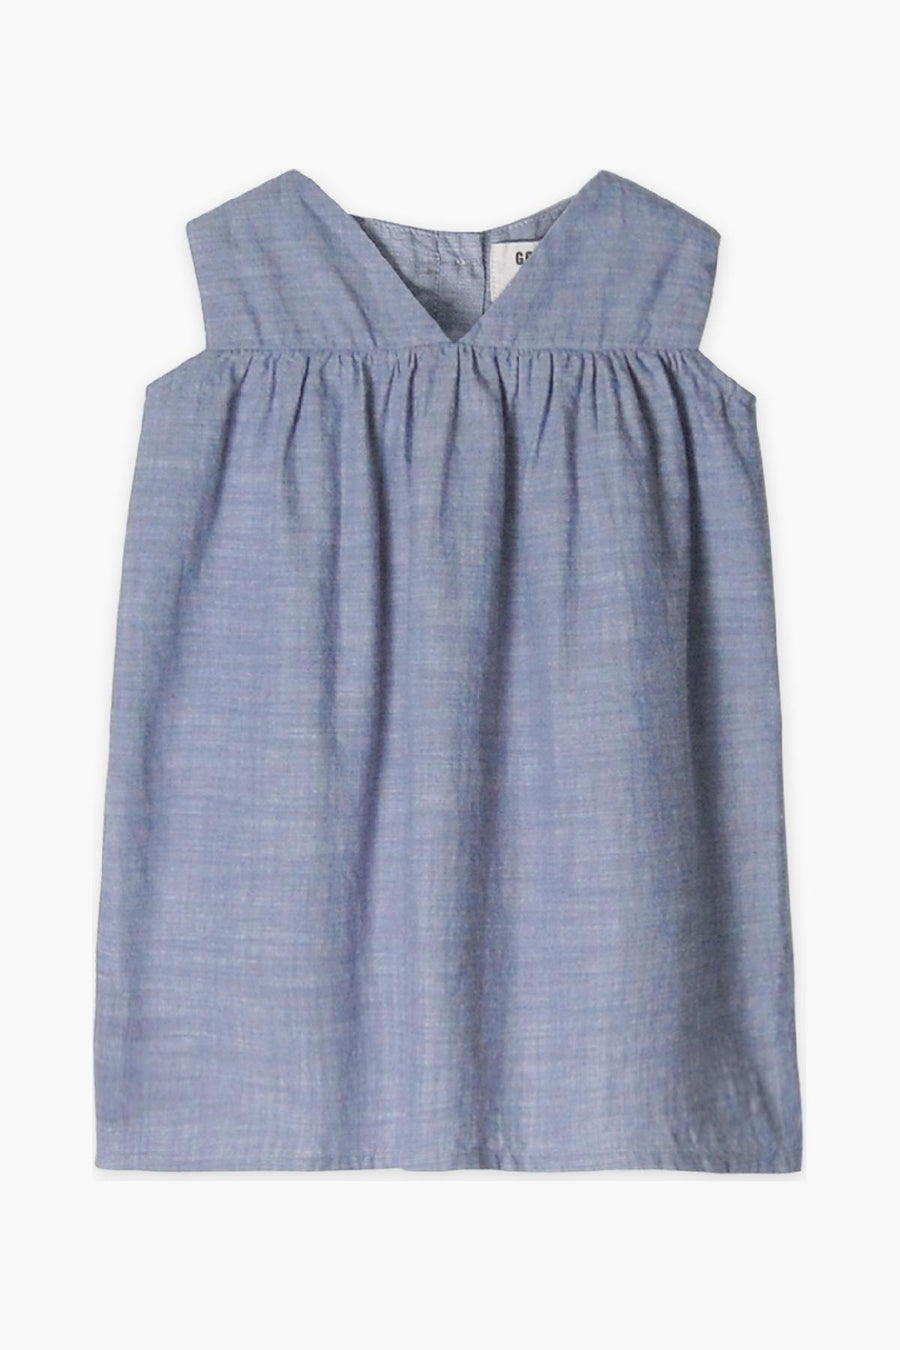 Girls Dresses, Kids Clothes | Mini Ruby Contemporary Childrenswear Page 6